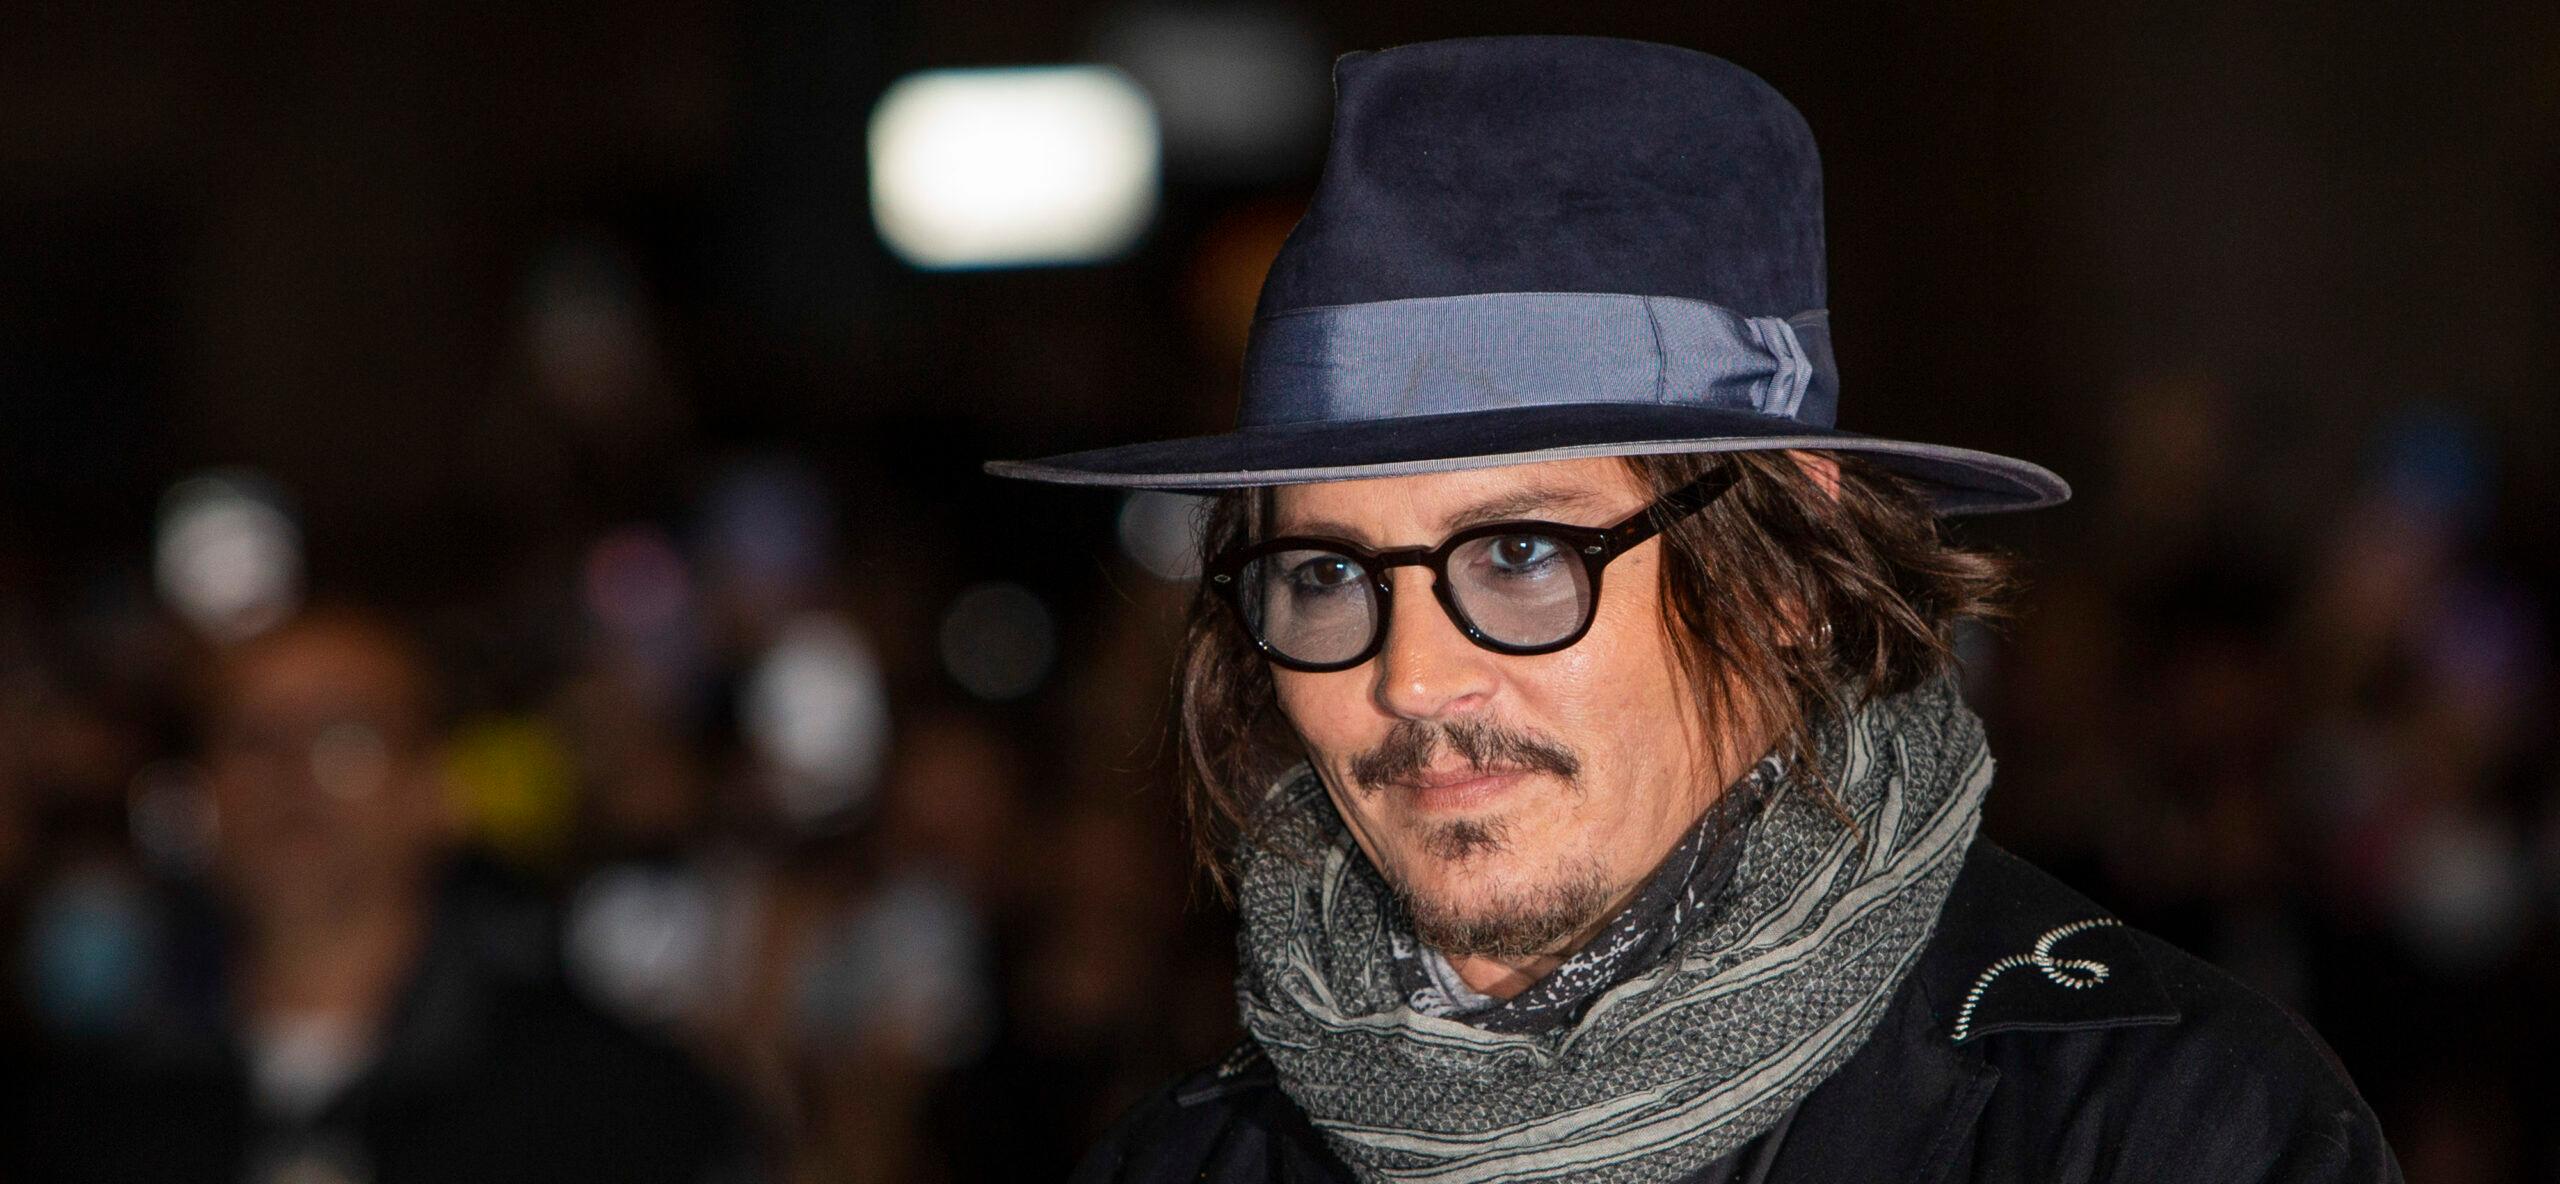 Johnny Depp Has A Blunt In Hand As He Returns As Jack Sparrow For Terminally Ill Kid